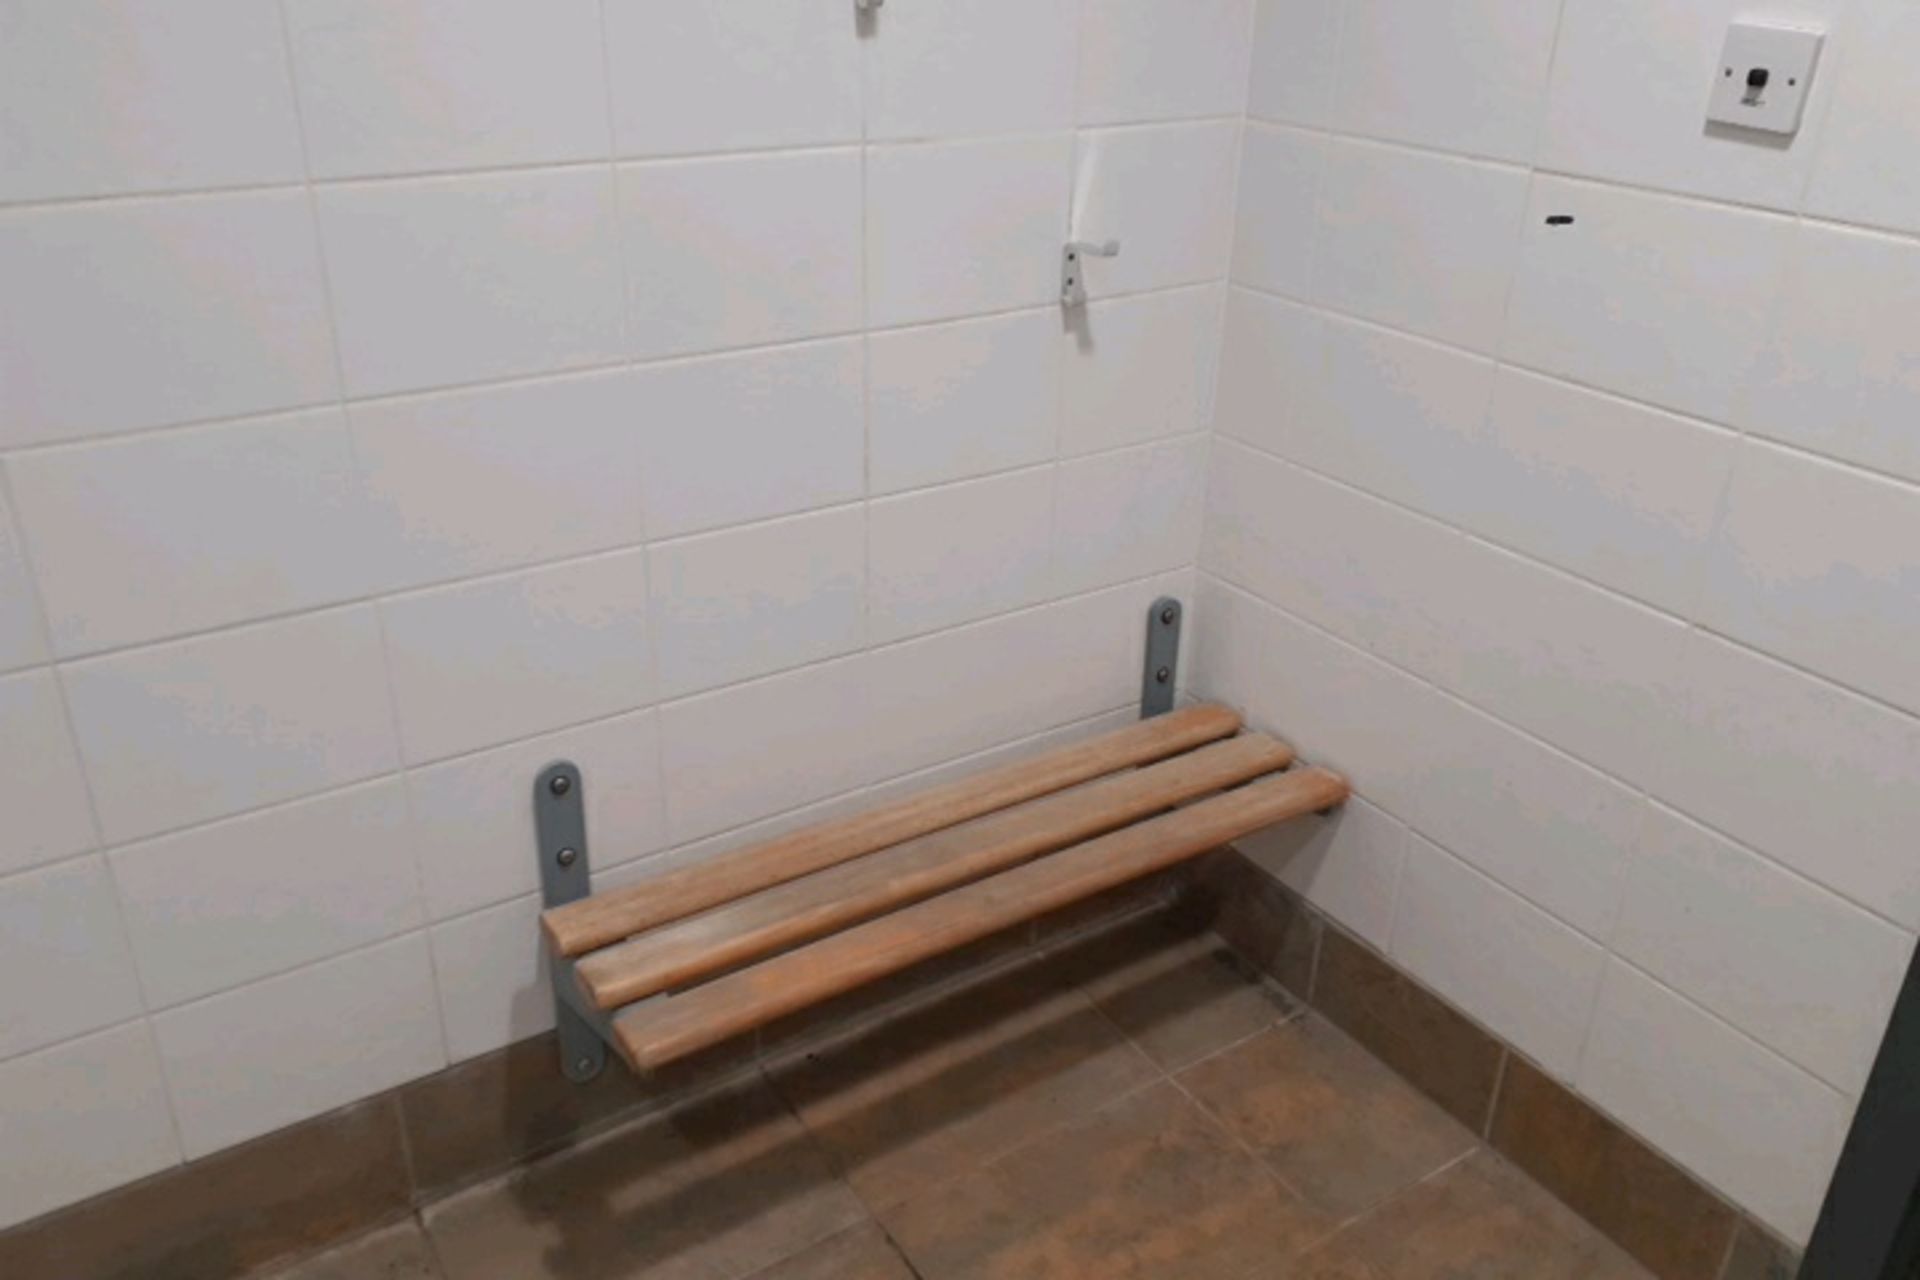 Accessible toilet - Image 3 of 4